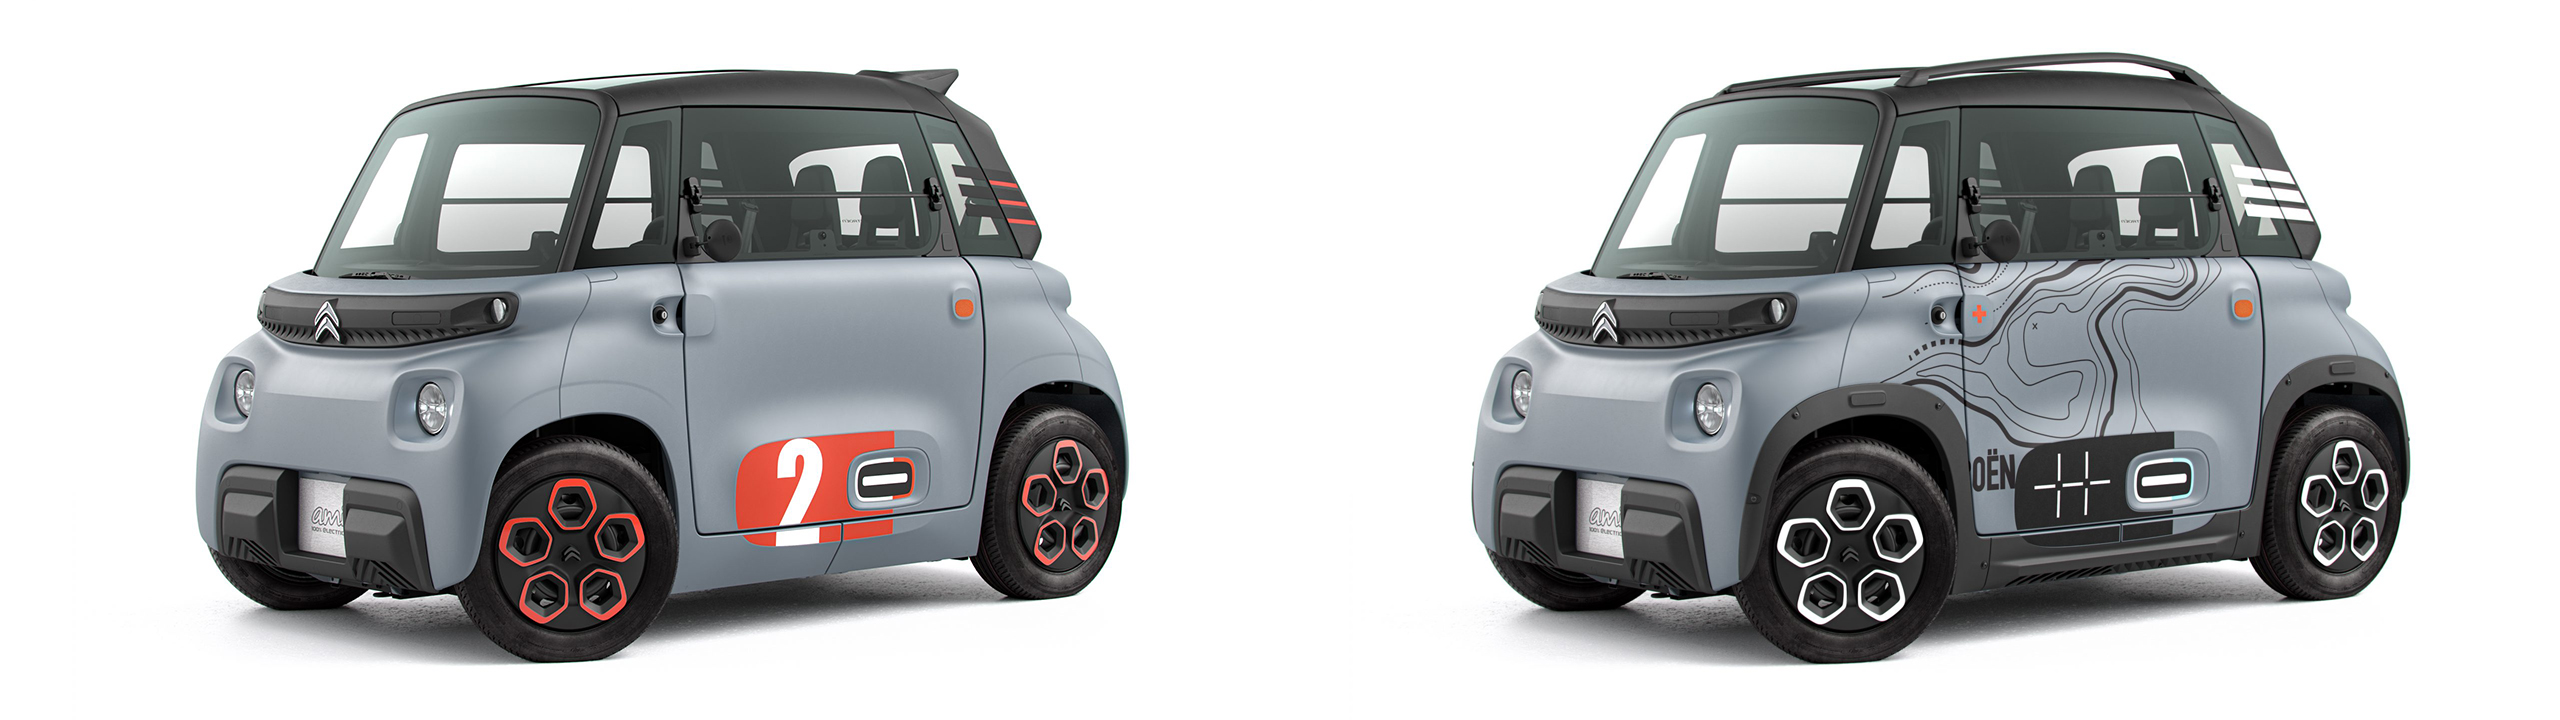 With Ami - 100% Ëlectric, Citroën Touts Mobility for All - Citroënvie!